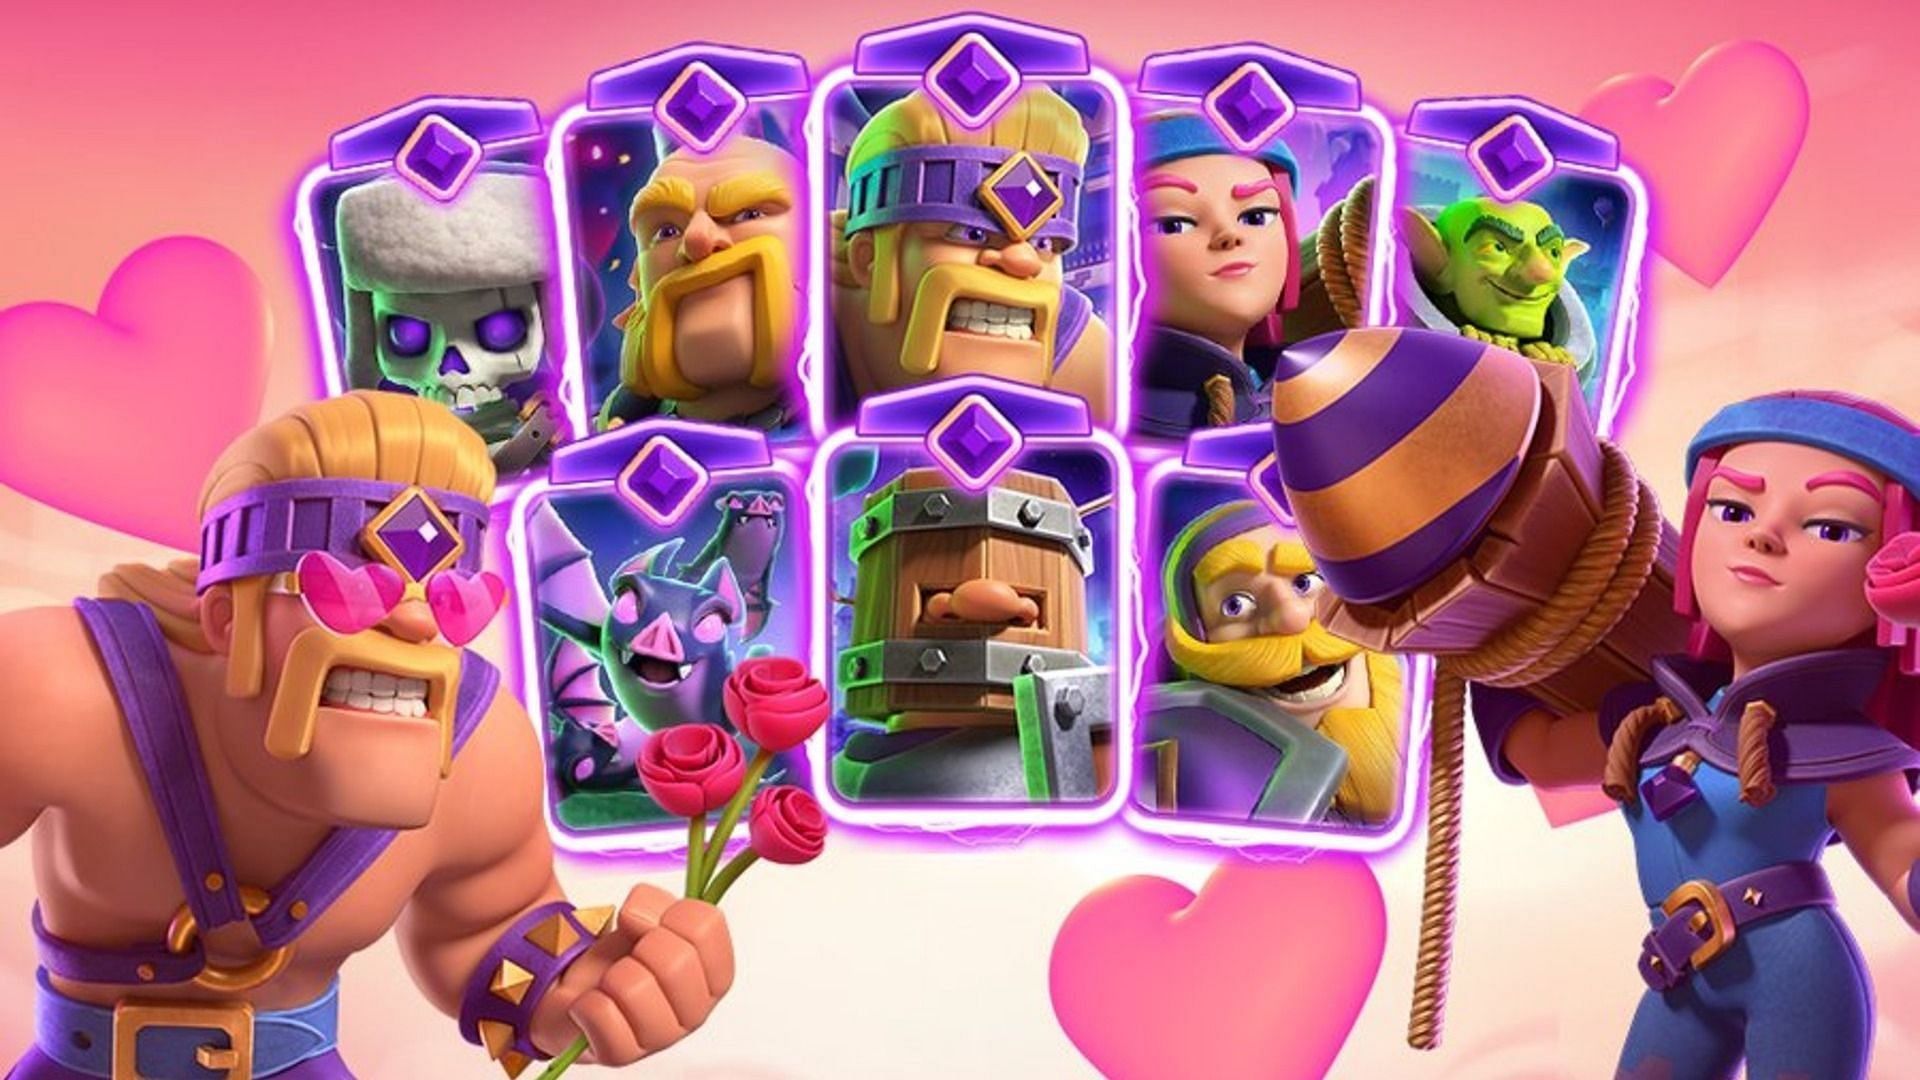 Clash Royale Wallpaper Discover more Clash Royale, Multiplayer